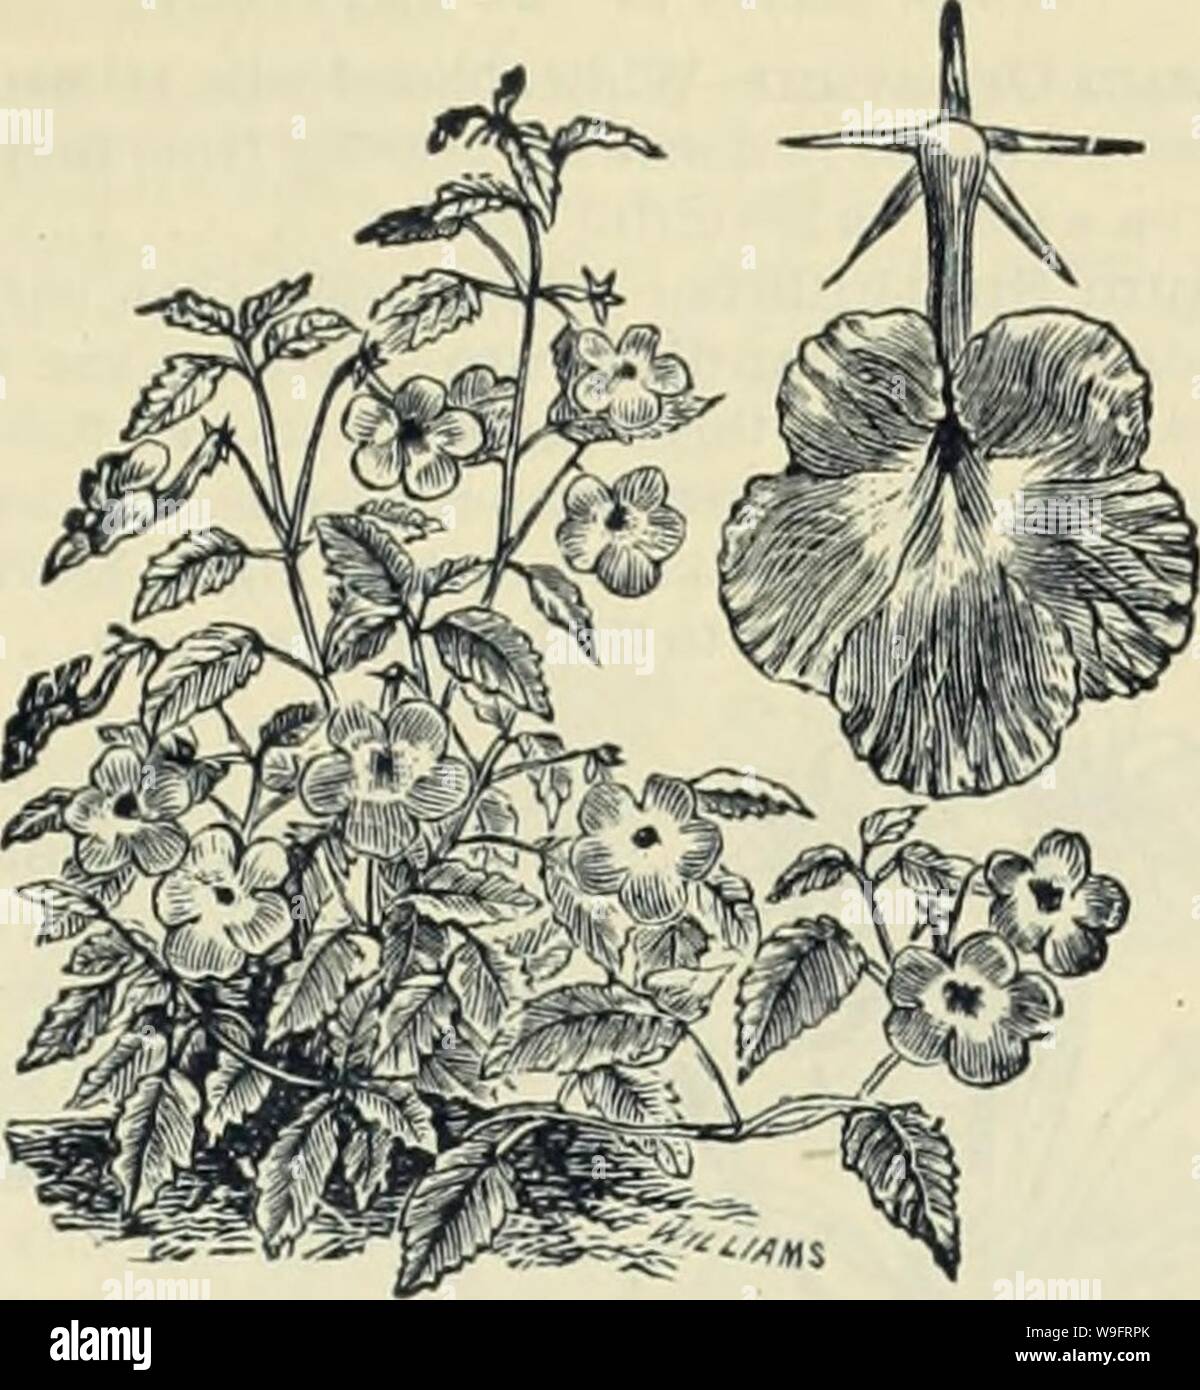 Archive image from page 66 of Currie Bros' horticultural guide . Currie Bros.' horticultural guide : spring 1888  curriebroshortic1888curr Year: 1888 ( ACHIMENES. Cristata—A charming plant for summer bloom- ing in the conservatory or house; flowers pendu- lous, of a rich shade of blue; each 15 AGAVE AMERICANA. The well known century plant; very ornamental, especially the variegated varieties; each, 125c to 1.00 AGAPANTHUS. This interesting iilant should be in every collection. It requires very little attention, and annually pro- duces an abundance of its pretty, blue, bell shaped blossoms, arr Stock Photo